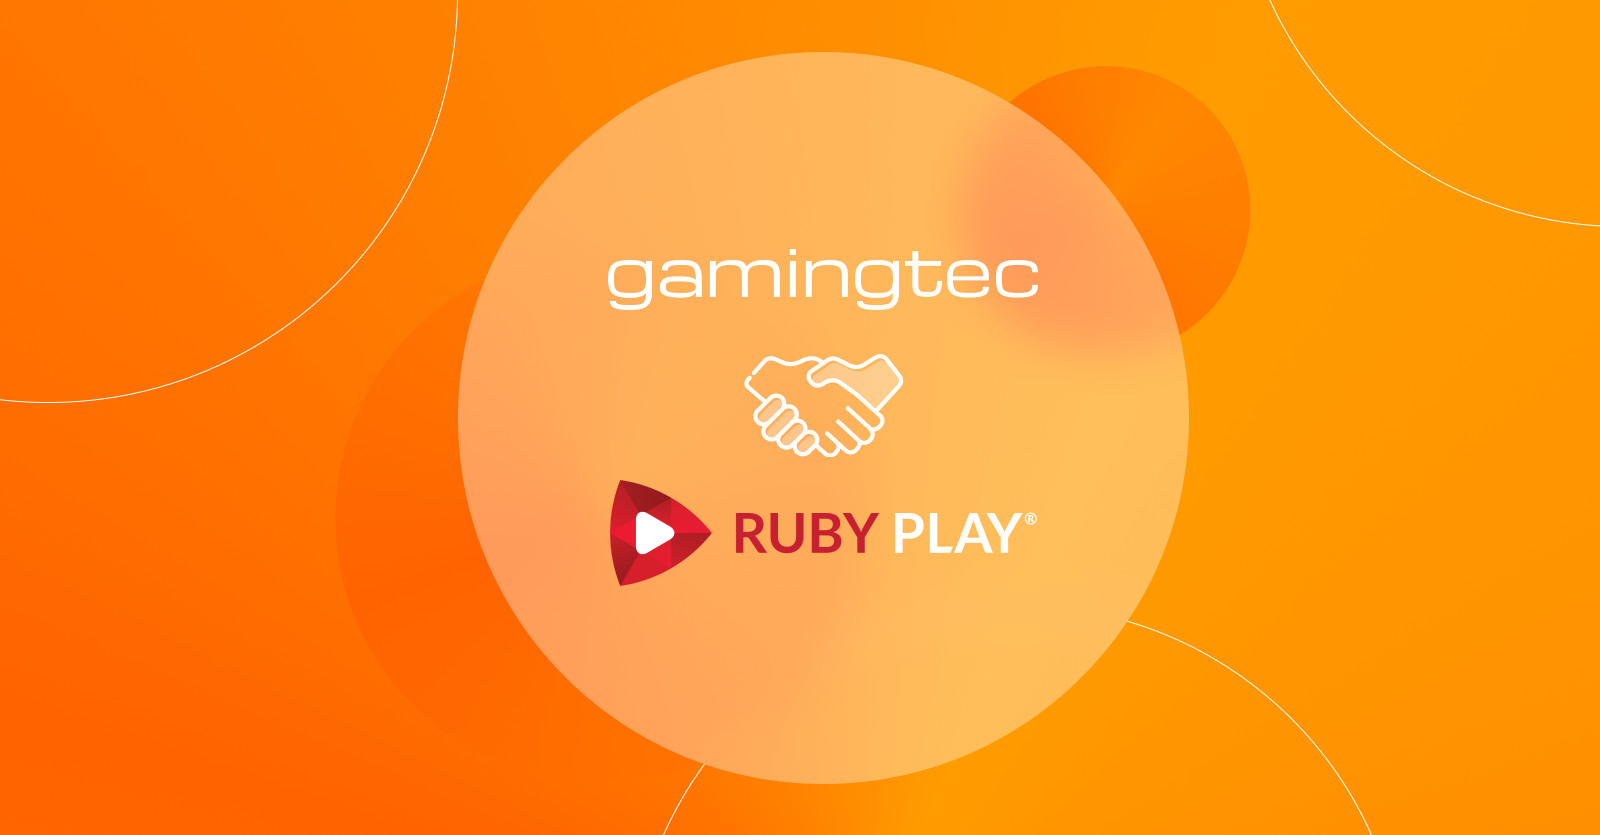 Gamingtec adds Ruby Play to burgeoning roster